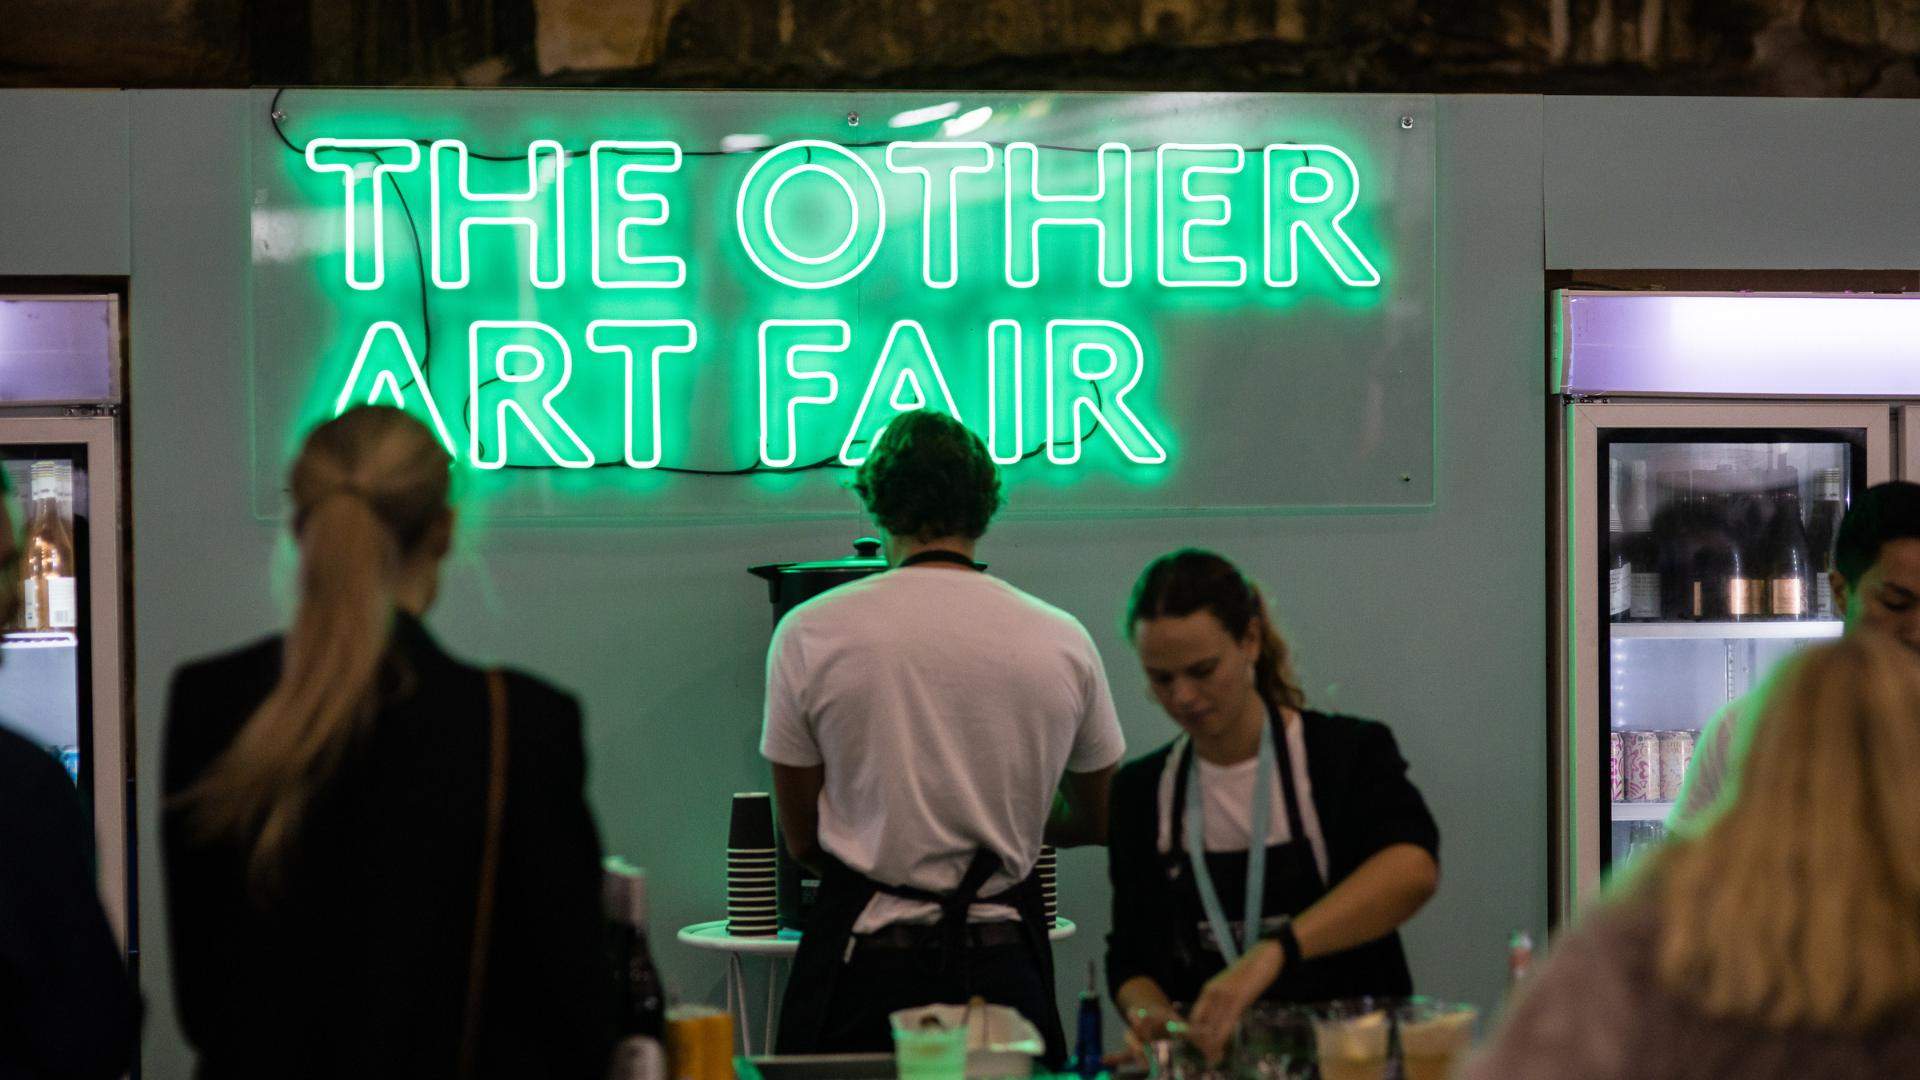 A man is pouring a drink under a sign that says THE OTHER ART FAIR spelled out in bright green LED lights.